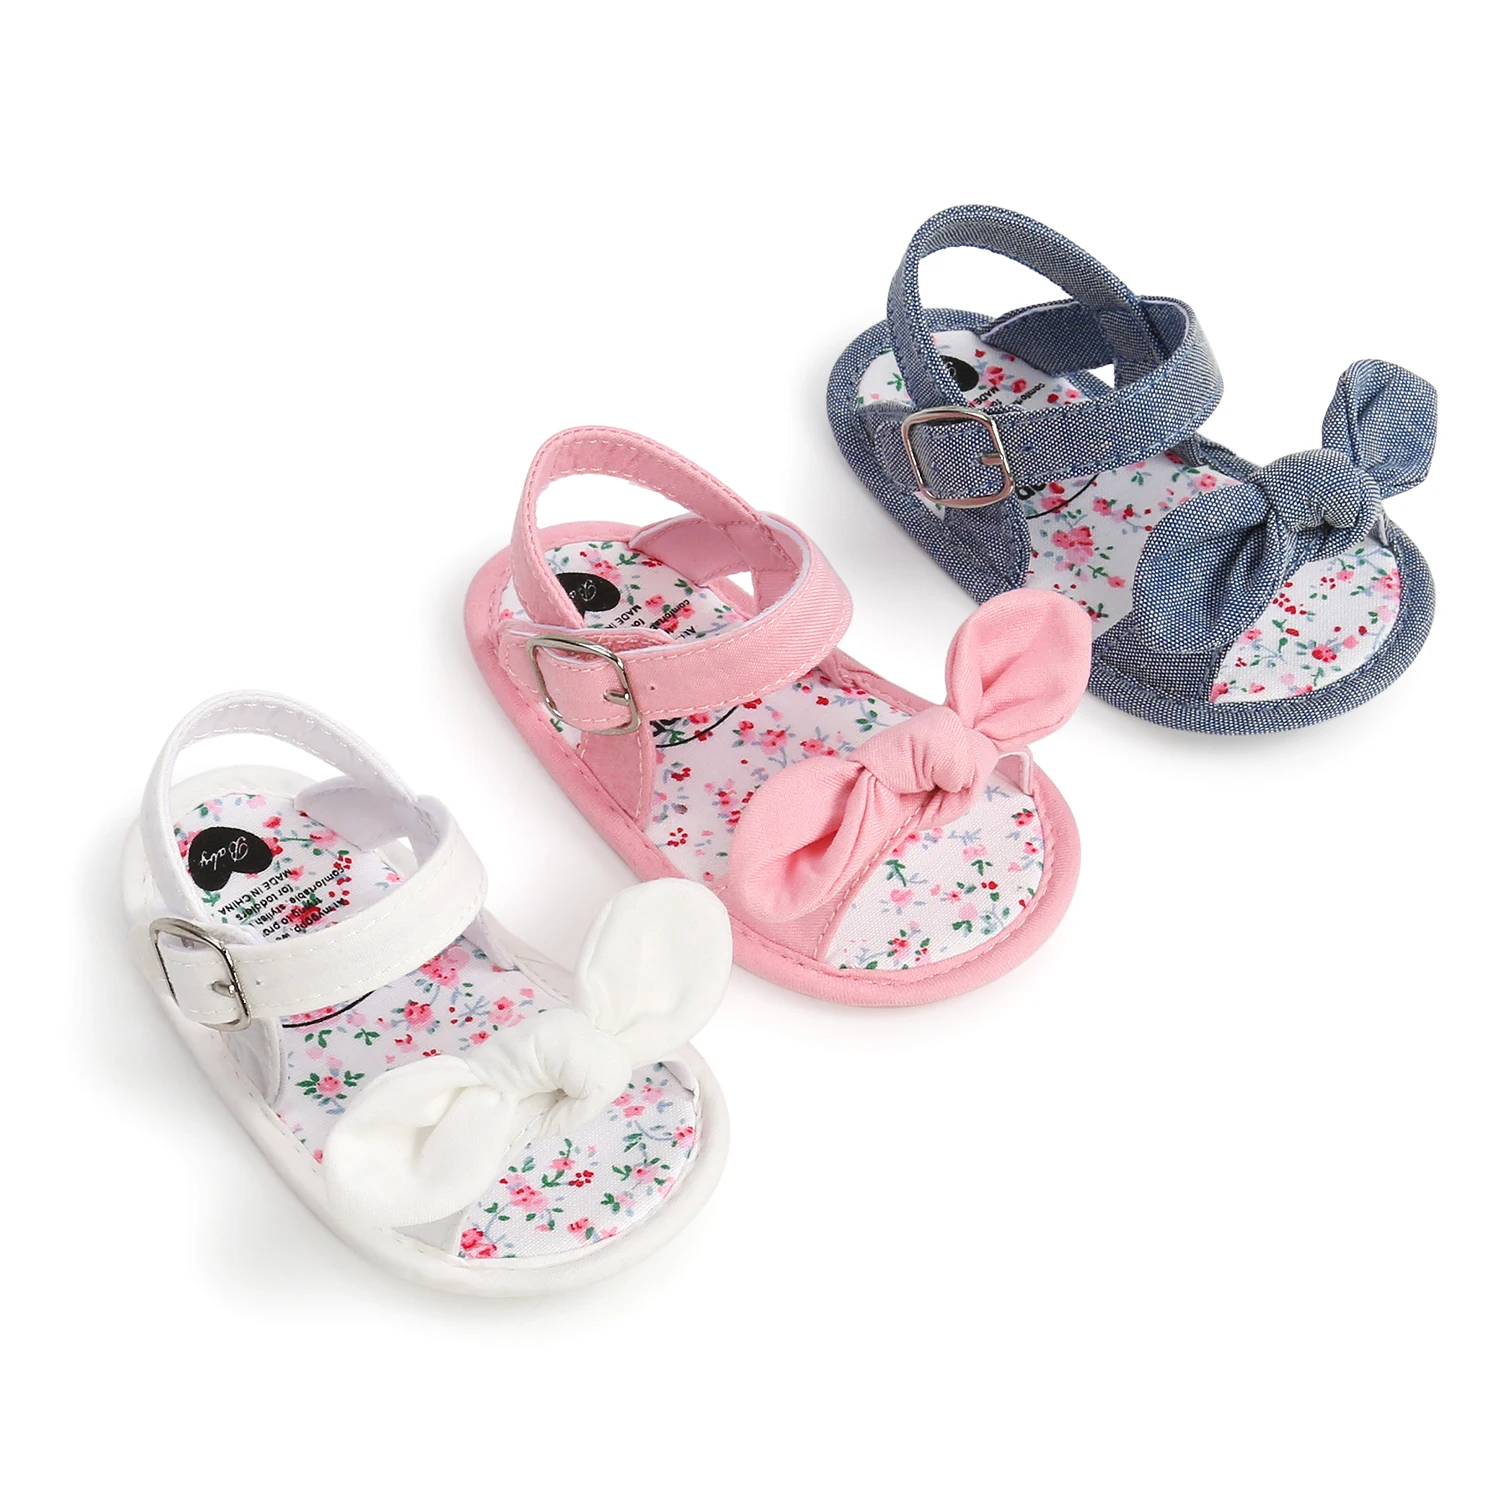 2023 New Bowknot Newborn Baby Princess Shoes Cotton Sole Light Weight Breathable Baby Girl Sandals